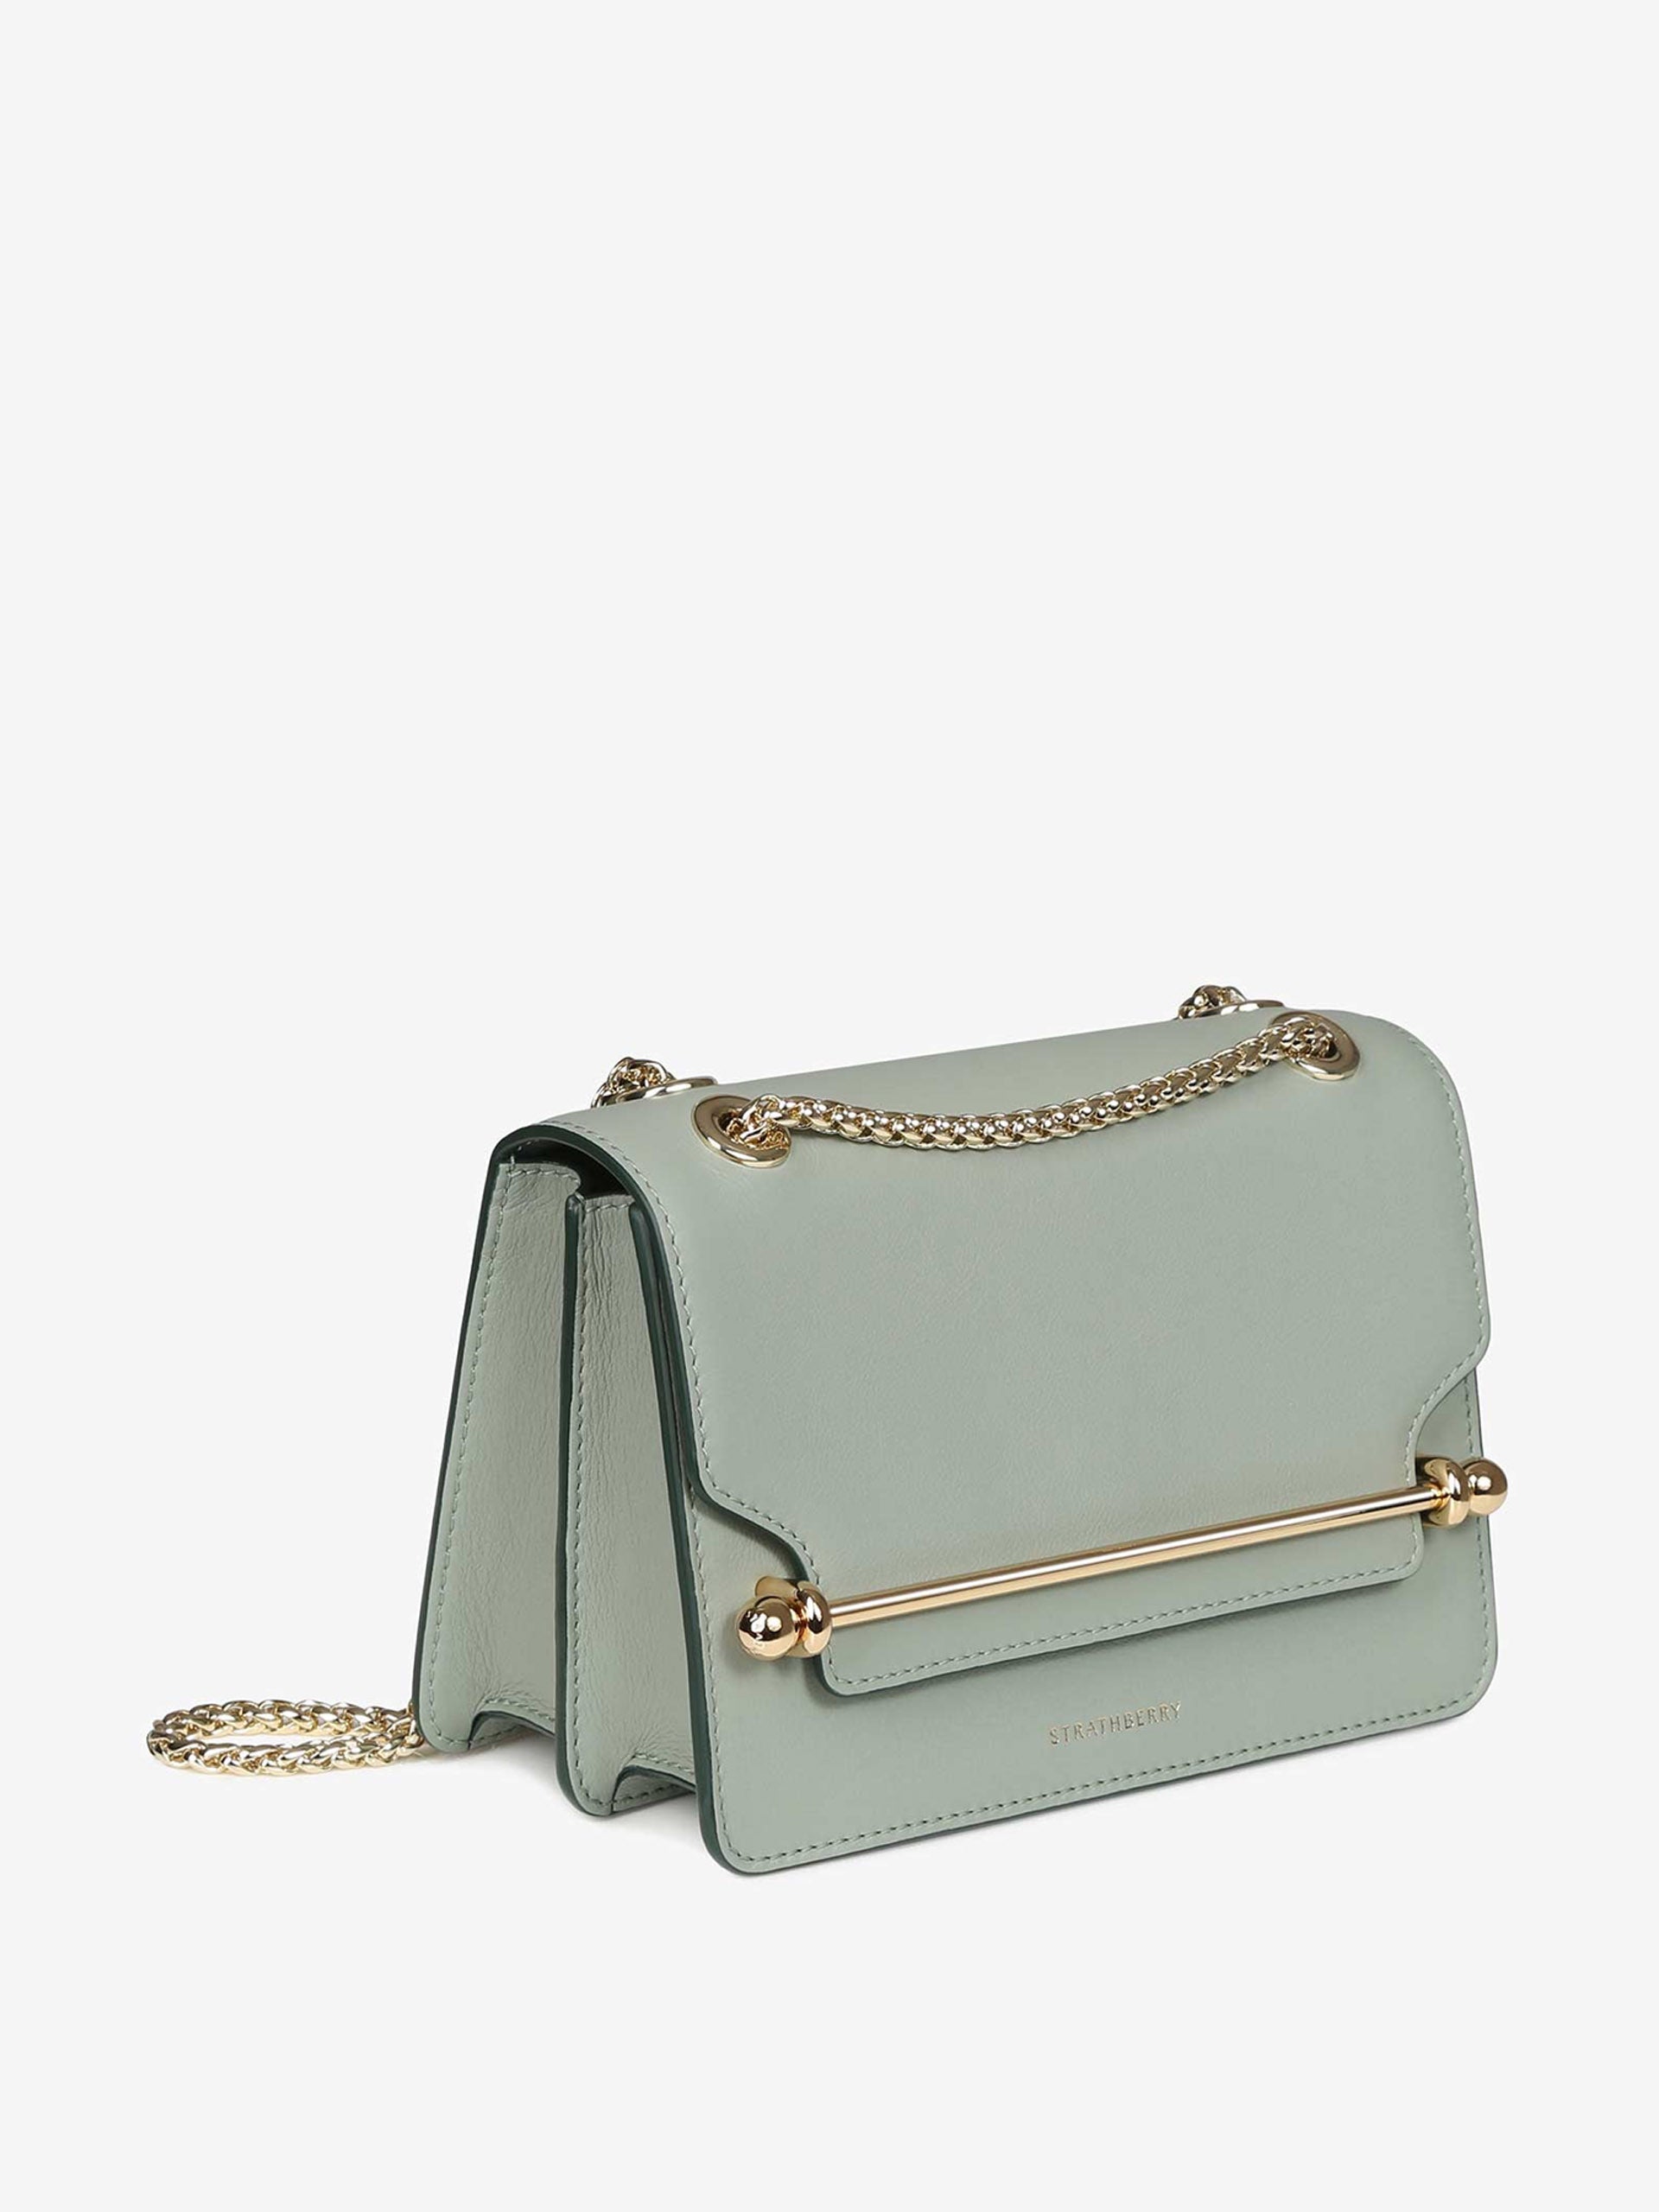 Strathberry Limited The Strathberry Midi Tote - Sage 795.00